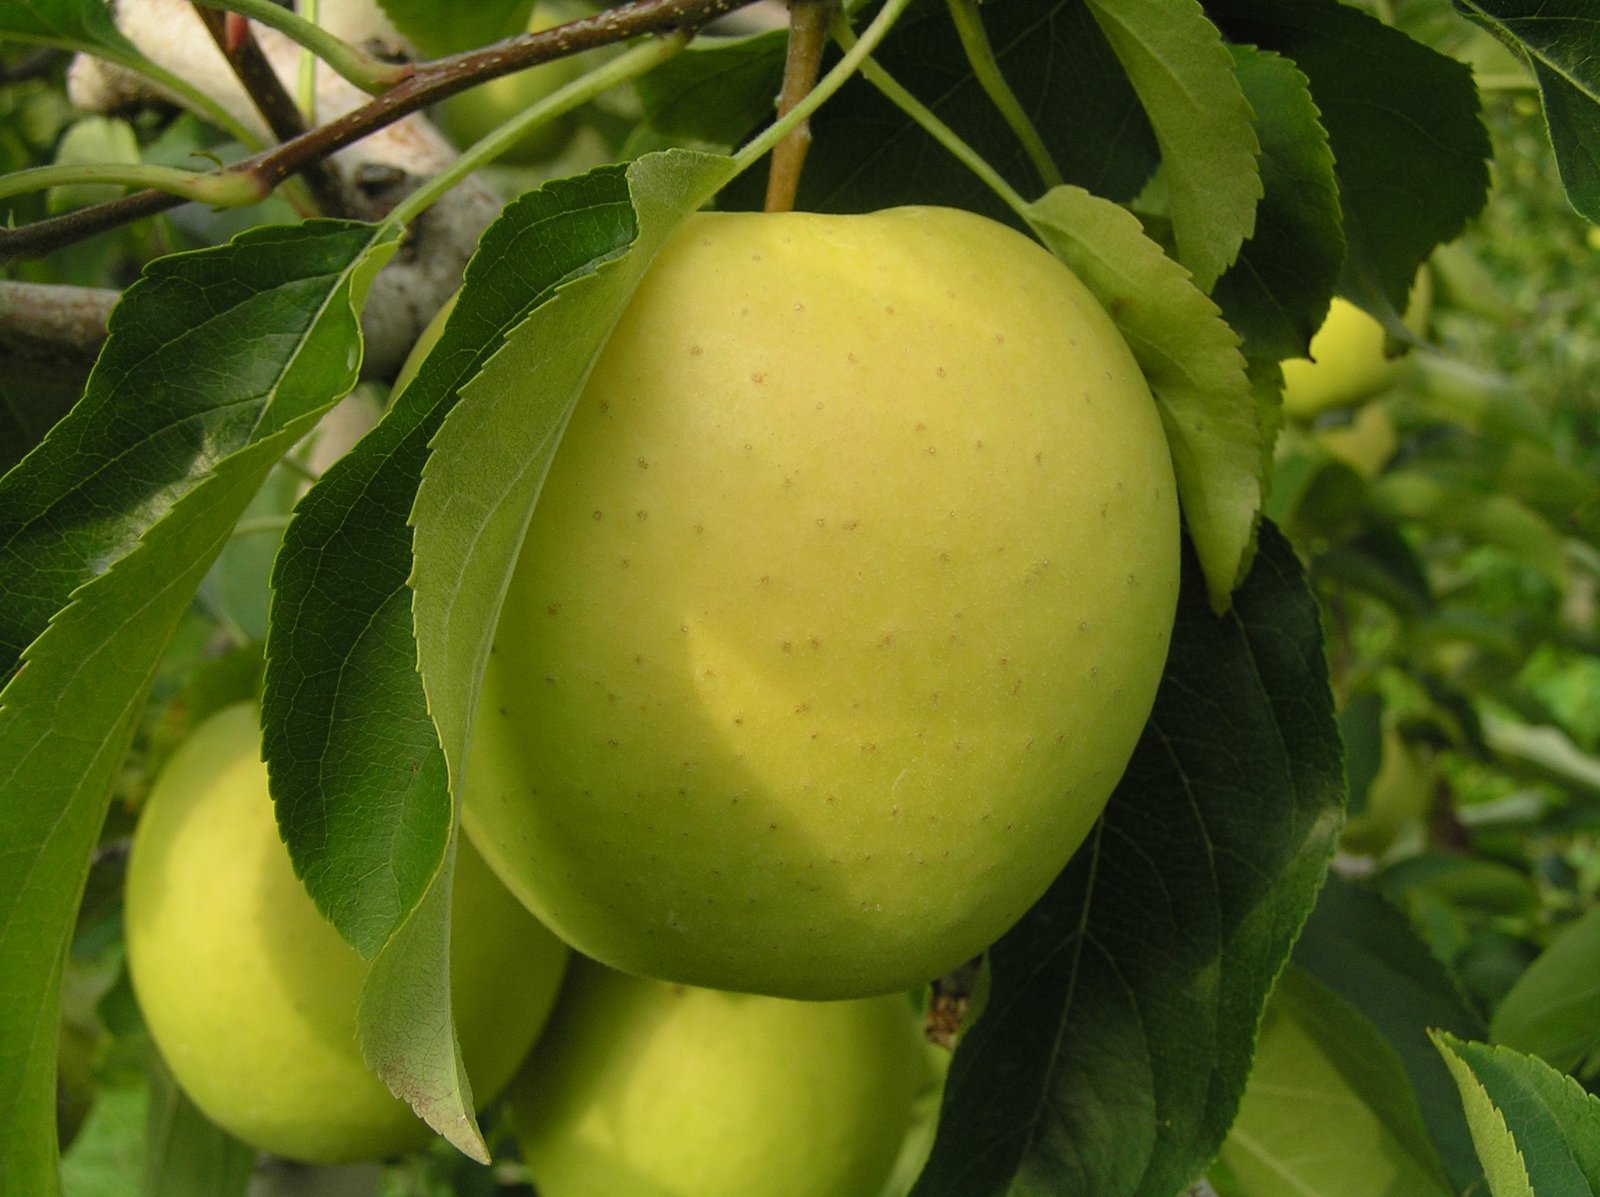 yellow apples are hanging on a tree